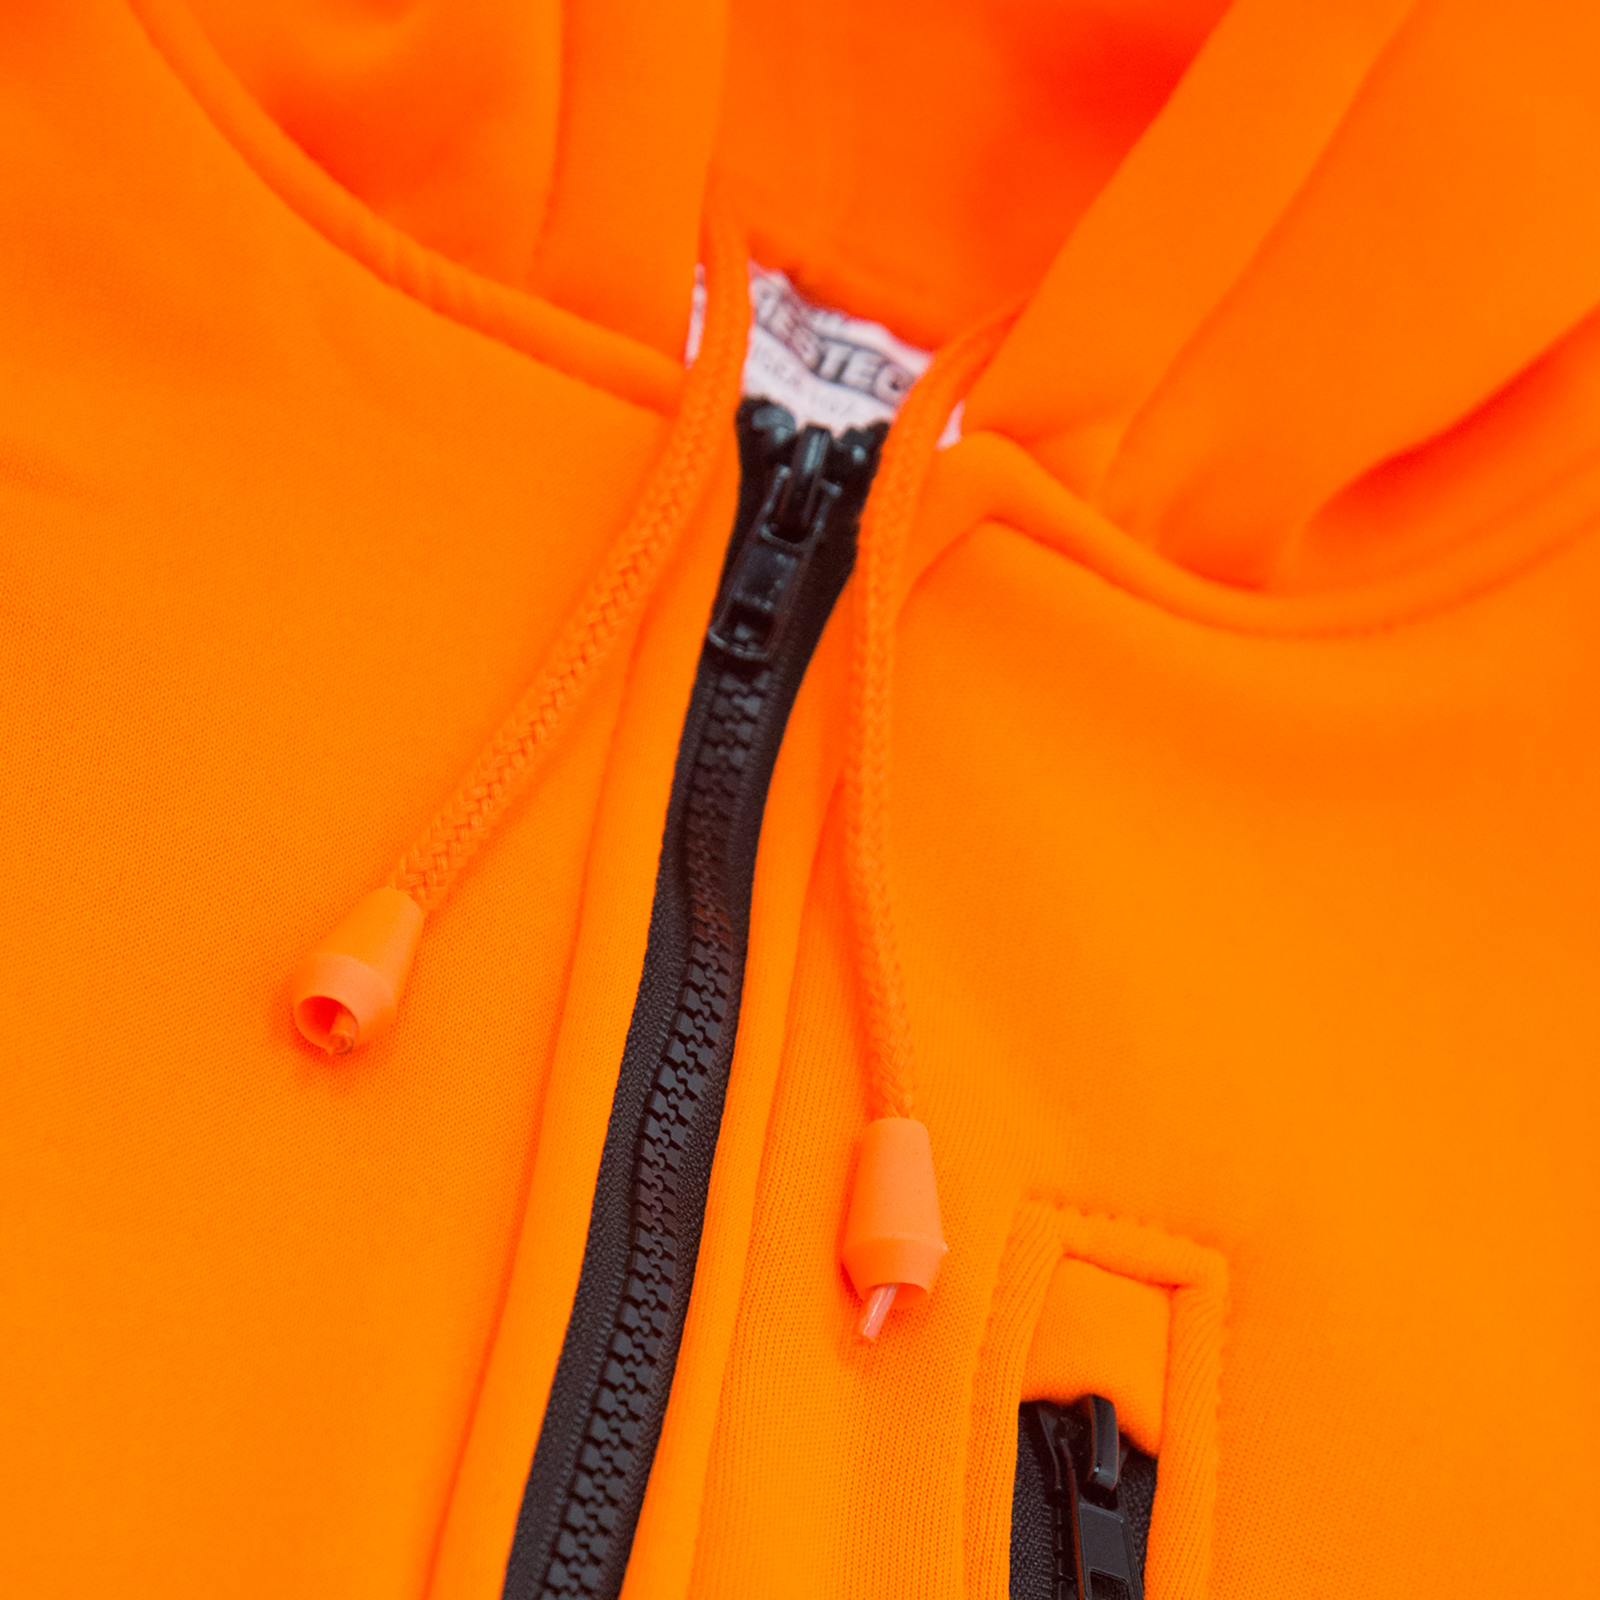 closeup shows the high quality zipper and the strings to adjust hood opening fit of the JORESTECH hi-vis safety hooded sweatshirt with reflective stripes